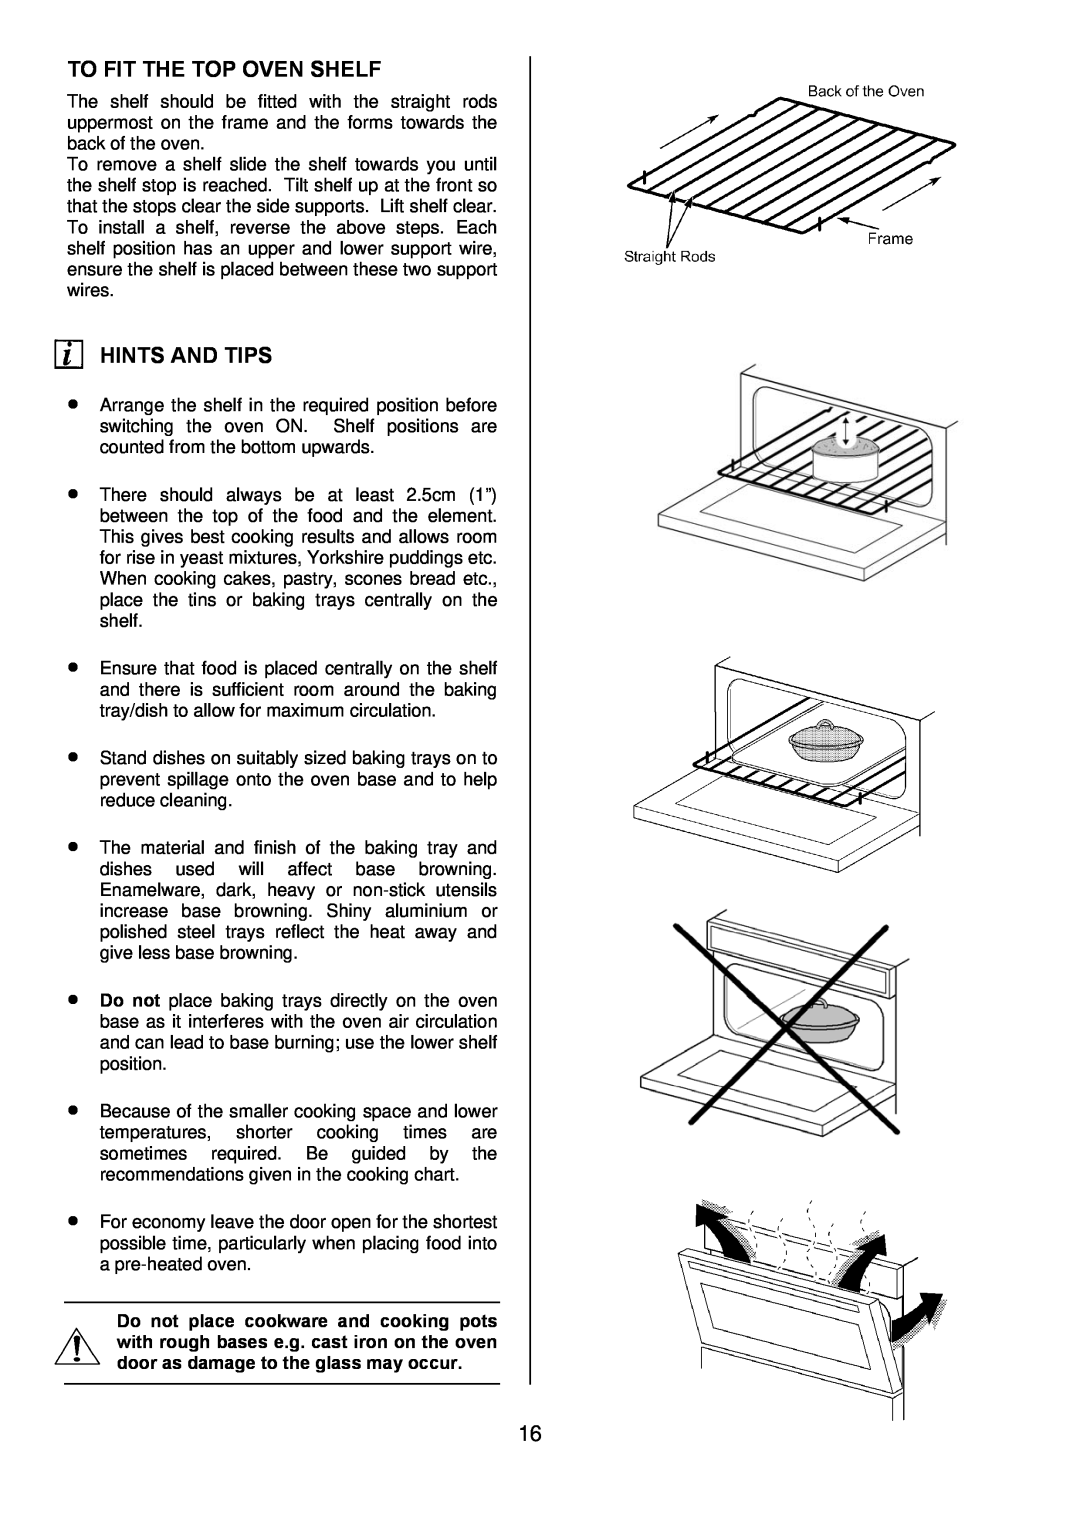 Zanussi ZDQ 995 manual To Fit The Top Oven Shelf, Hints And Tips 